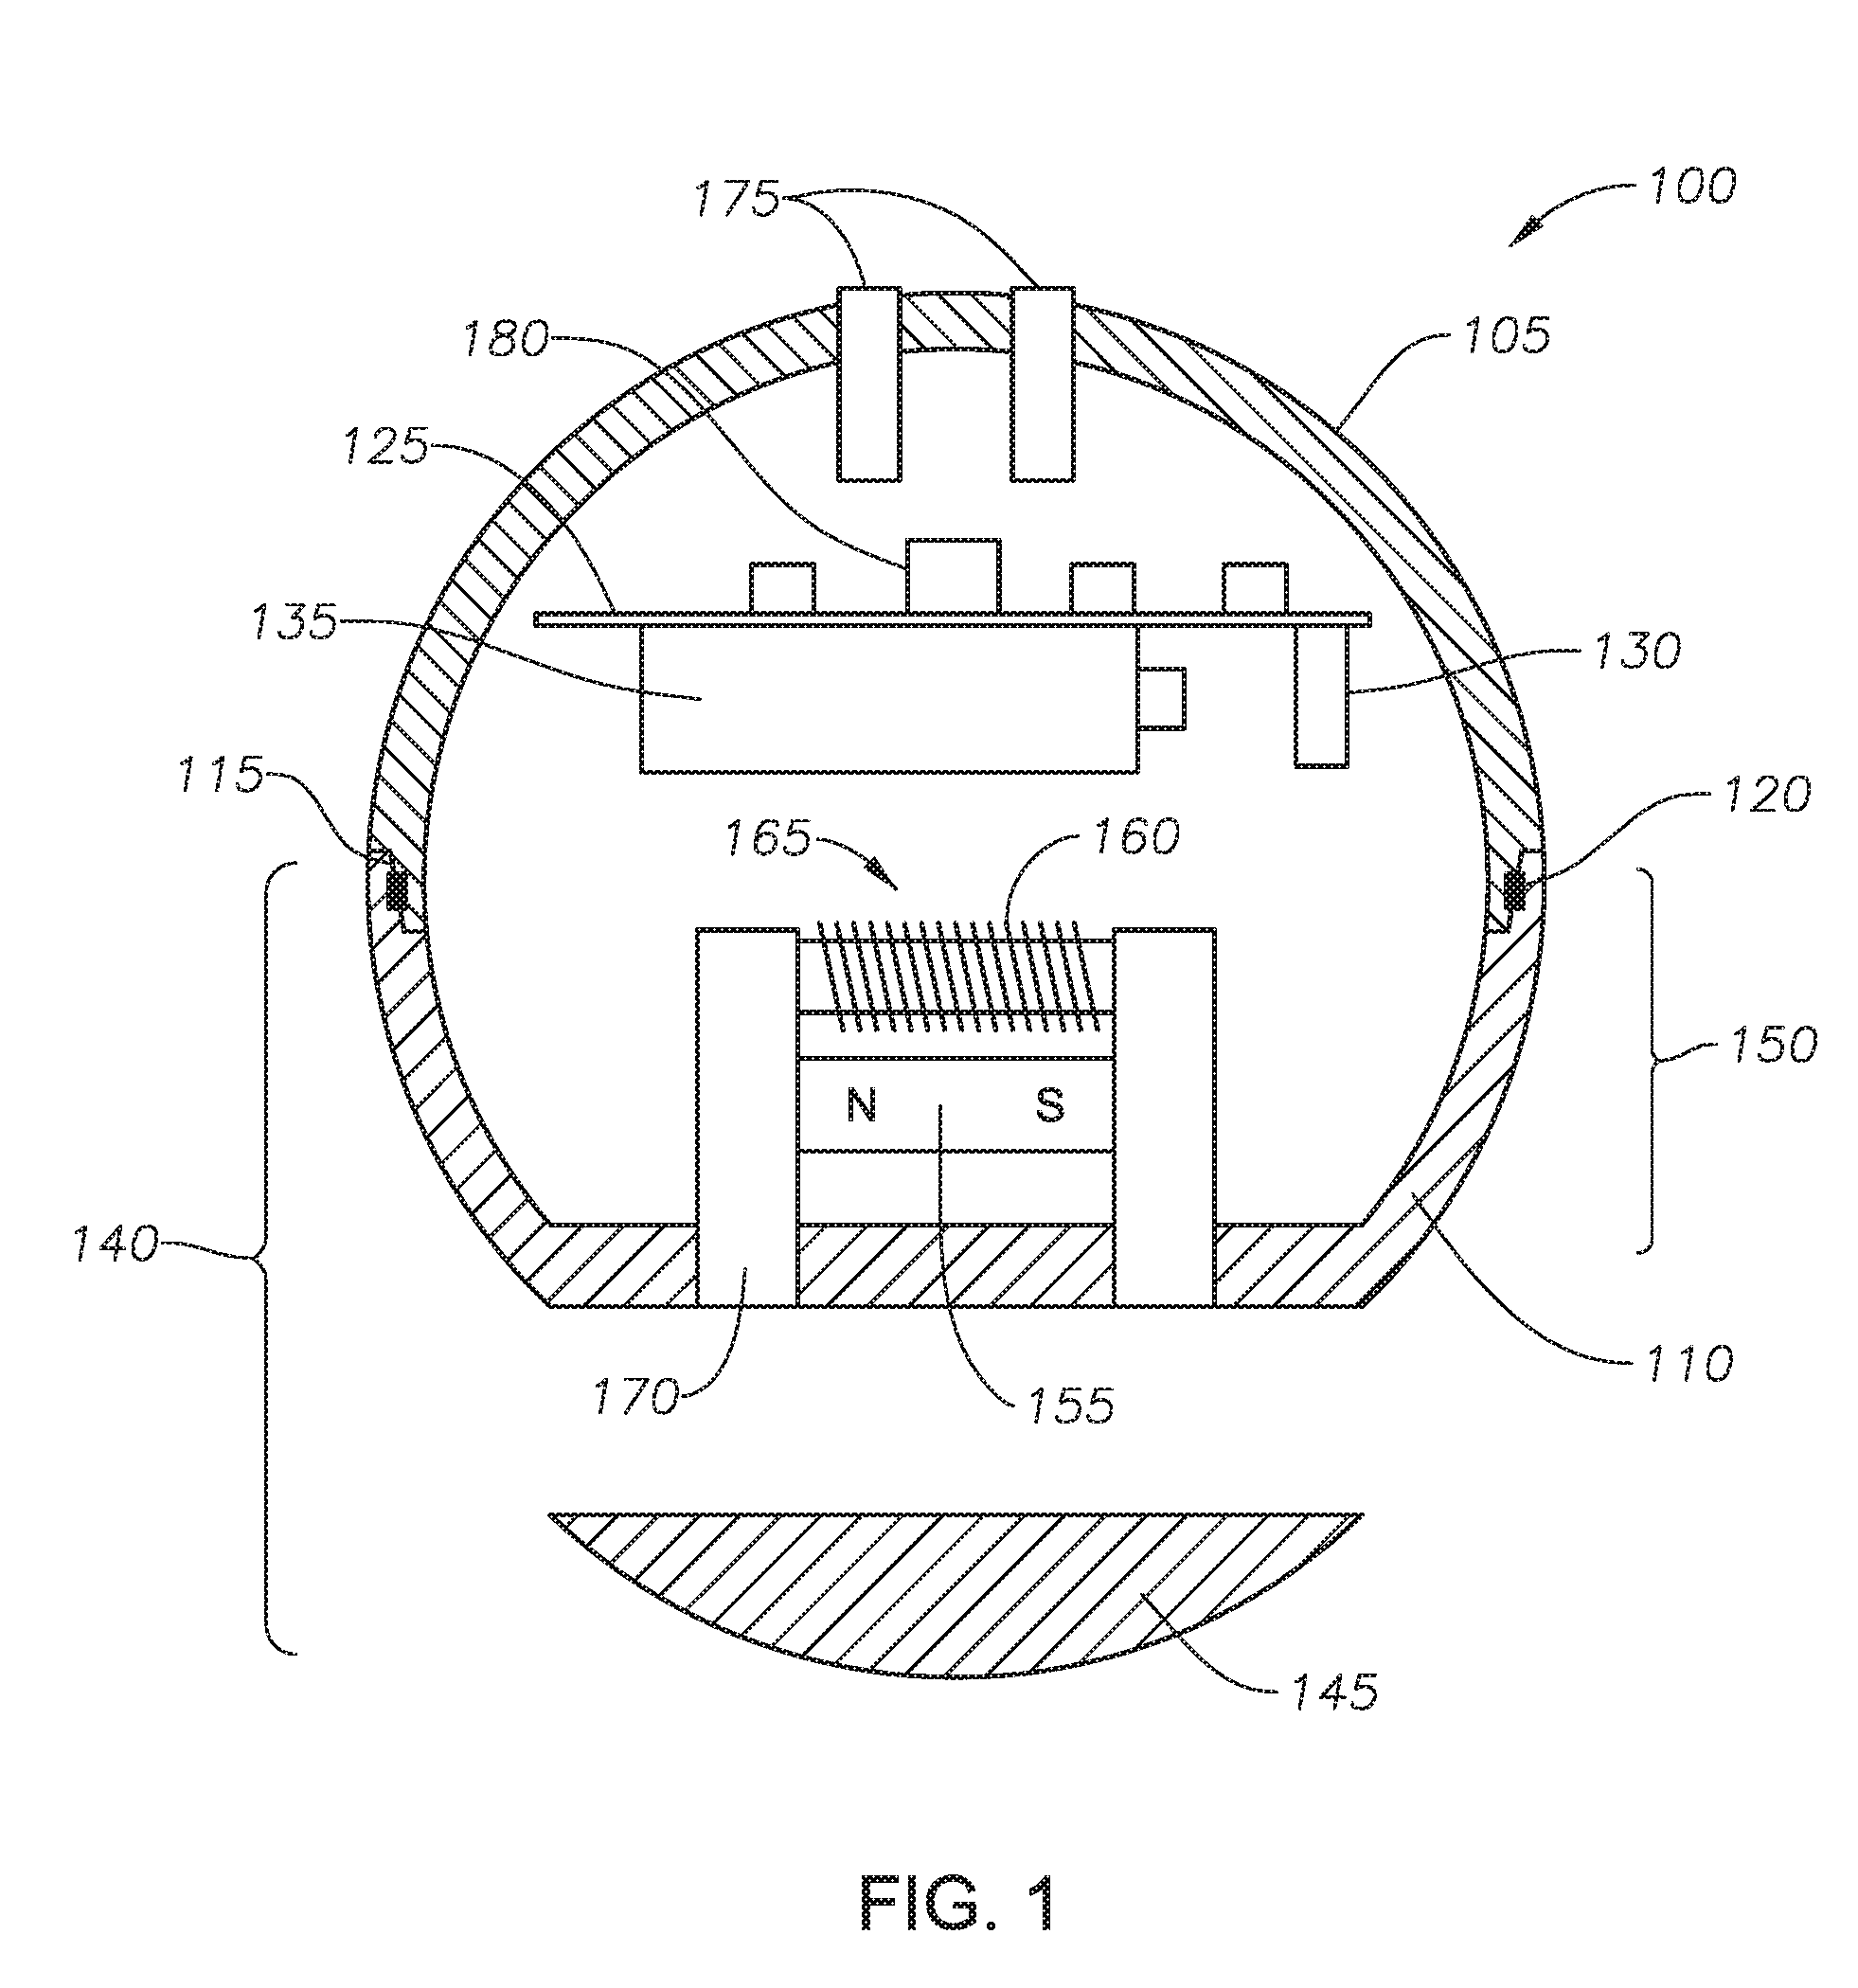 Method and device for obtaining measurements of downhole properties in a subterranean well